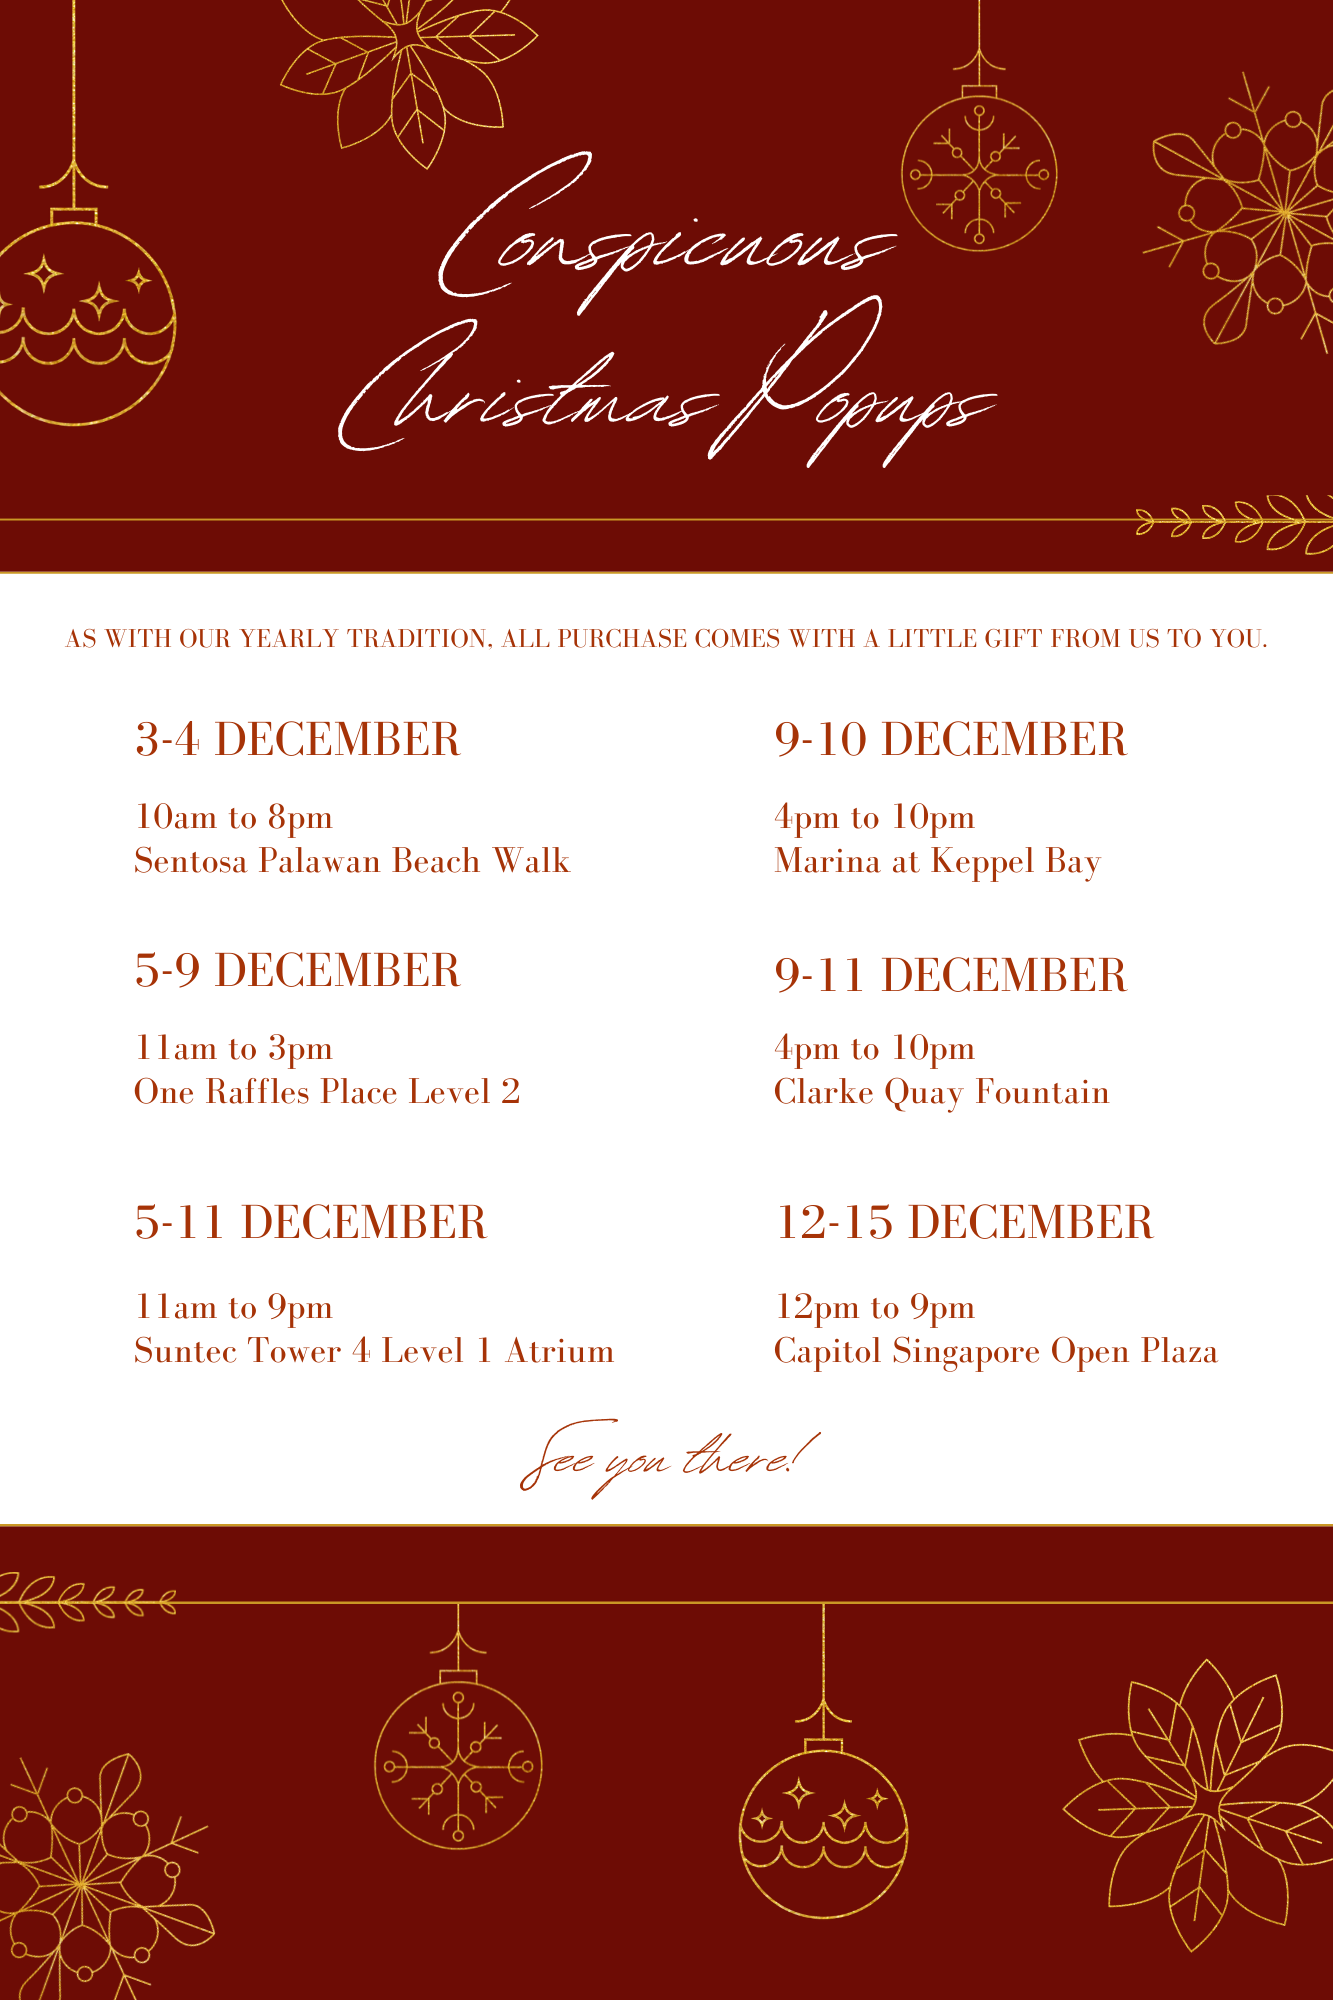 CONSPICUOUS is excited to be back this year with more Festive Pop-ups!